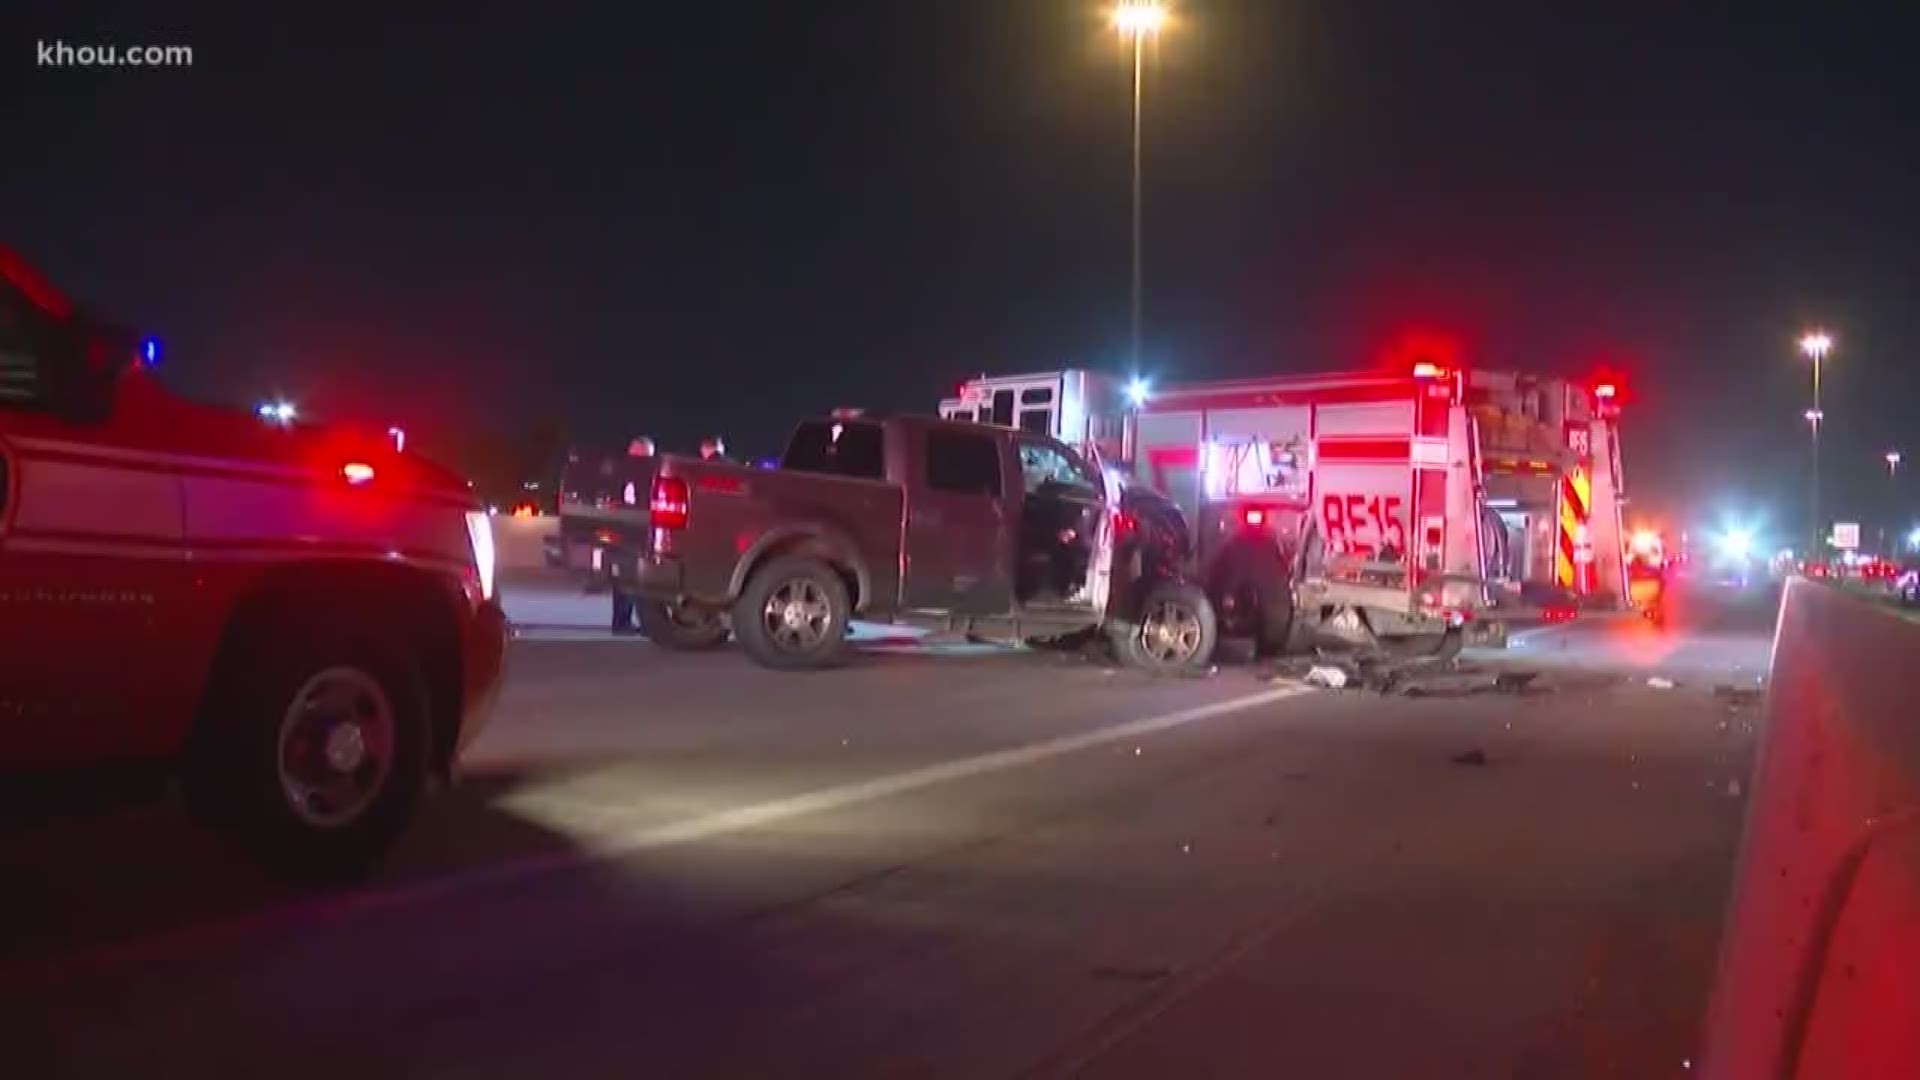 A woman is recovering in the hospital after she crashed into a Houston Fire Department fire truck. Police believe the woman may have been intoxicated.